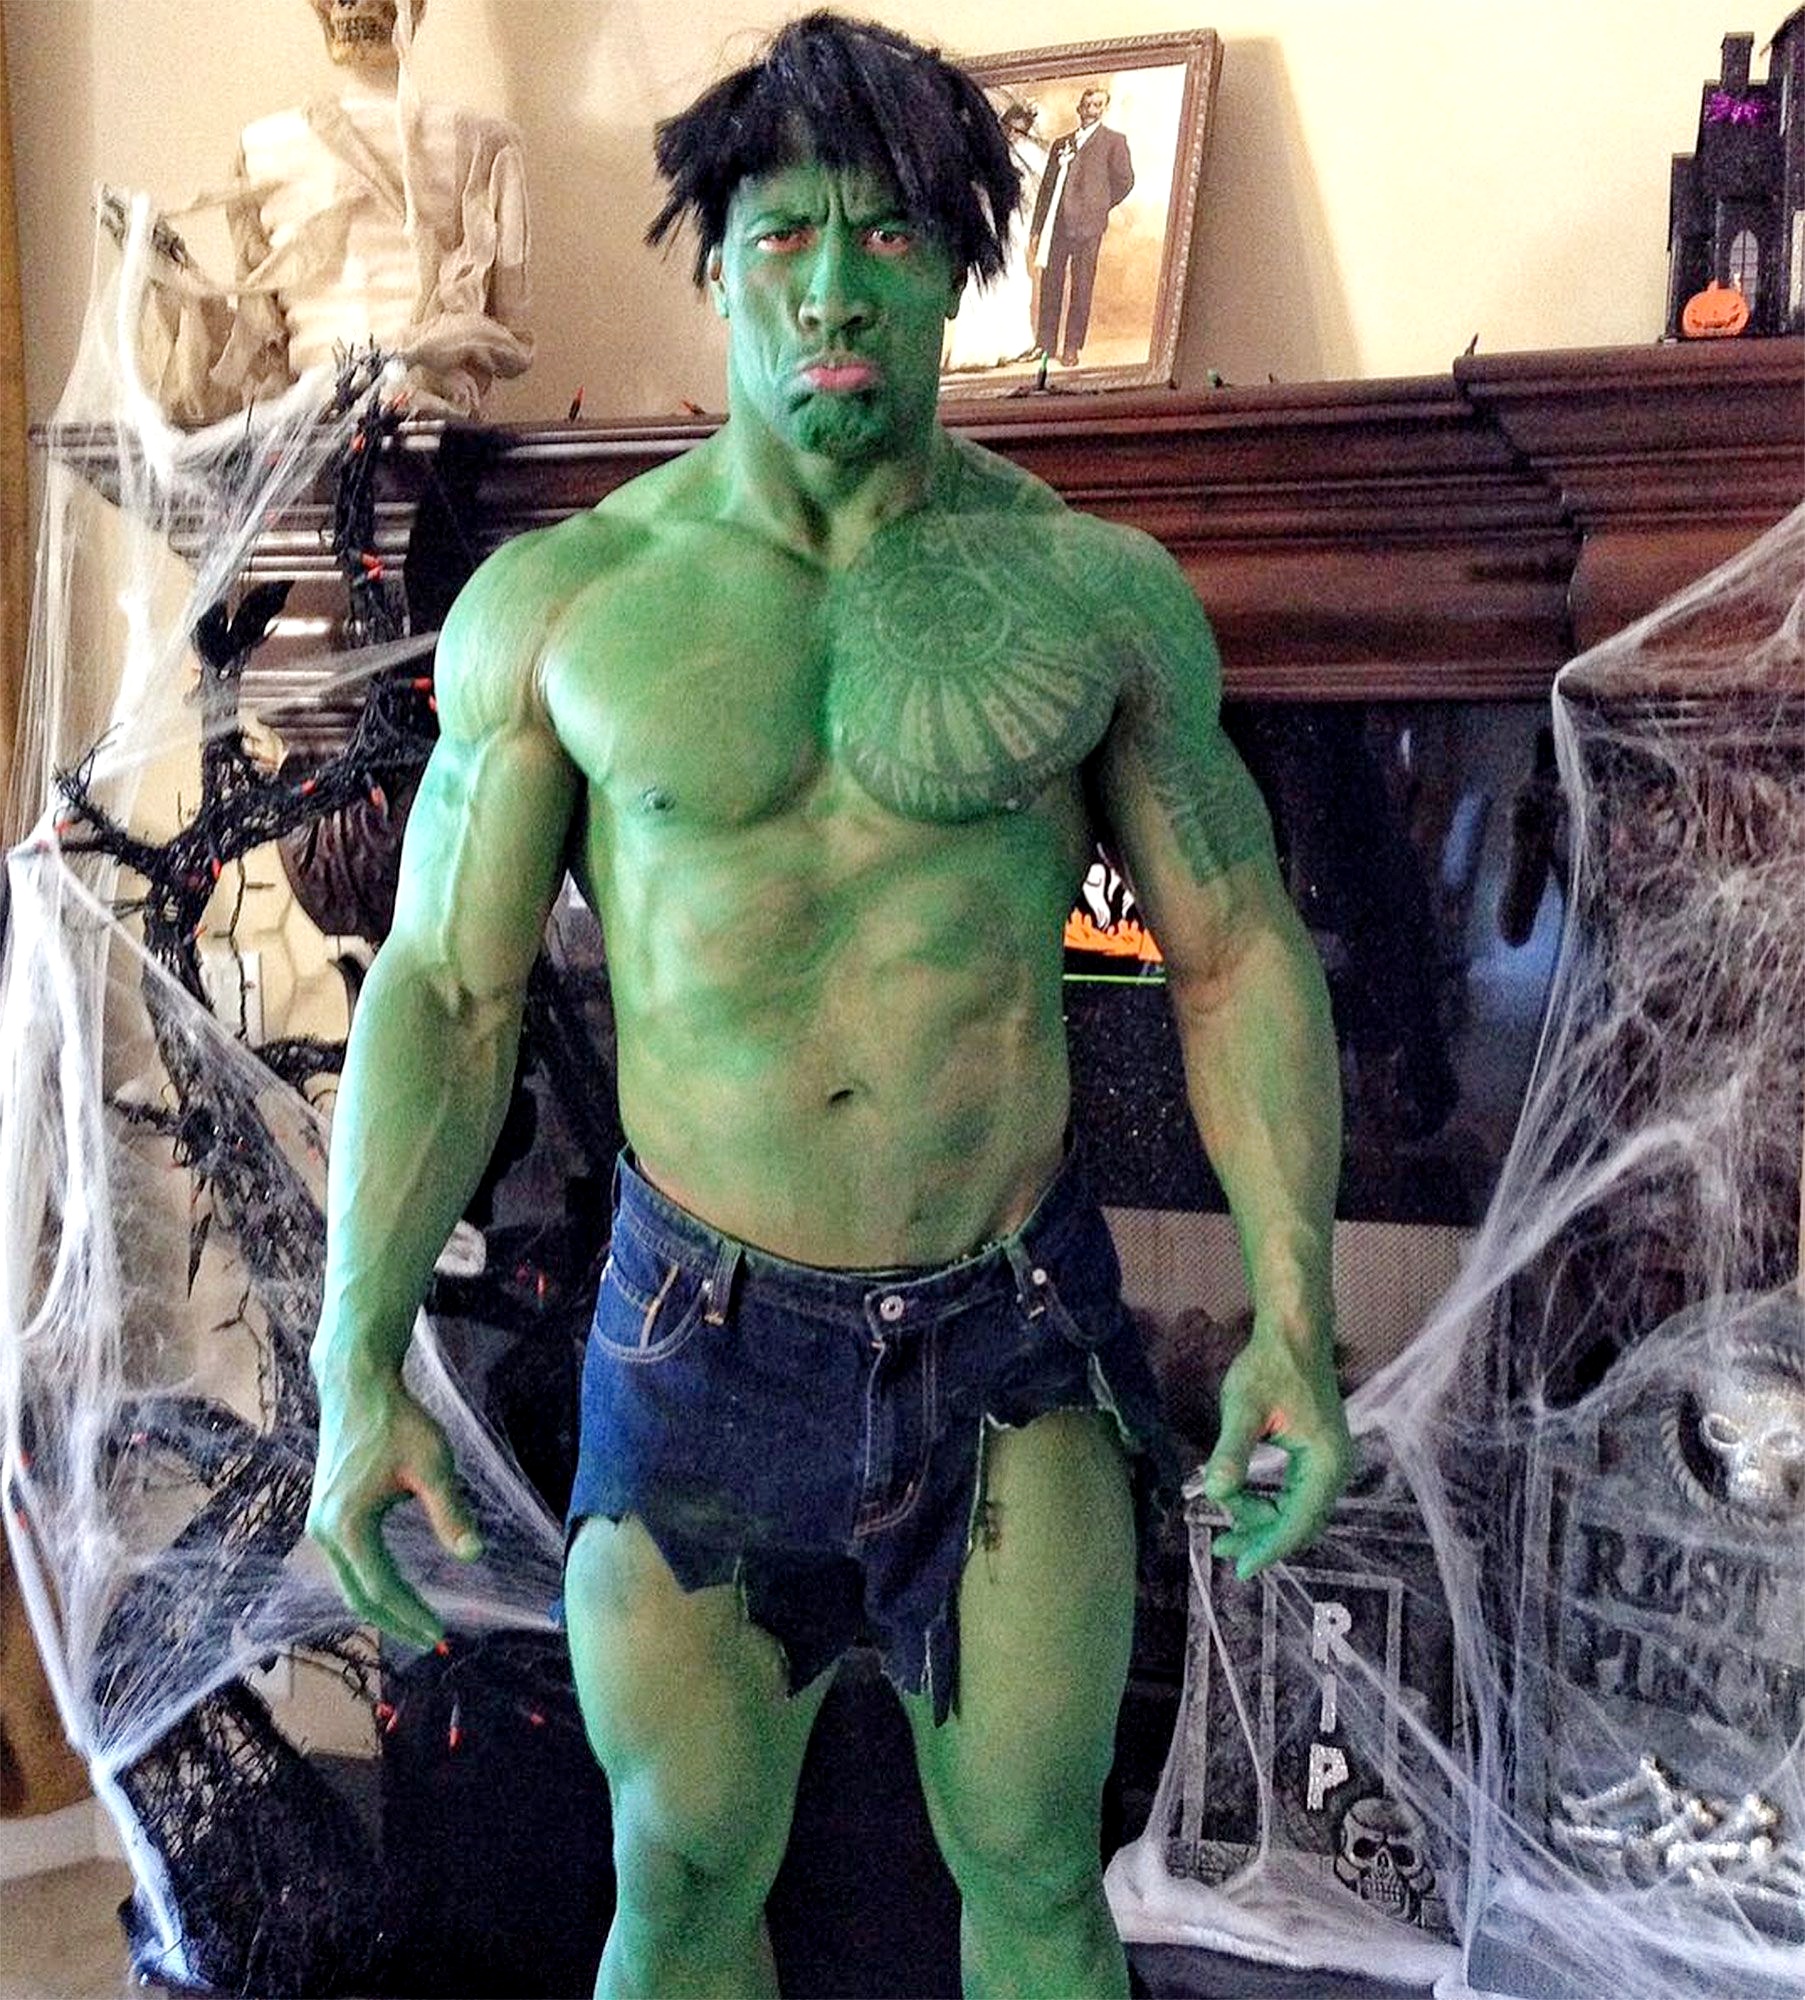 The Rock Conquers the Challenge by Transforming Into 'The Hulk' in His Halloween Costume, Leaving Millions of Fans in Awe